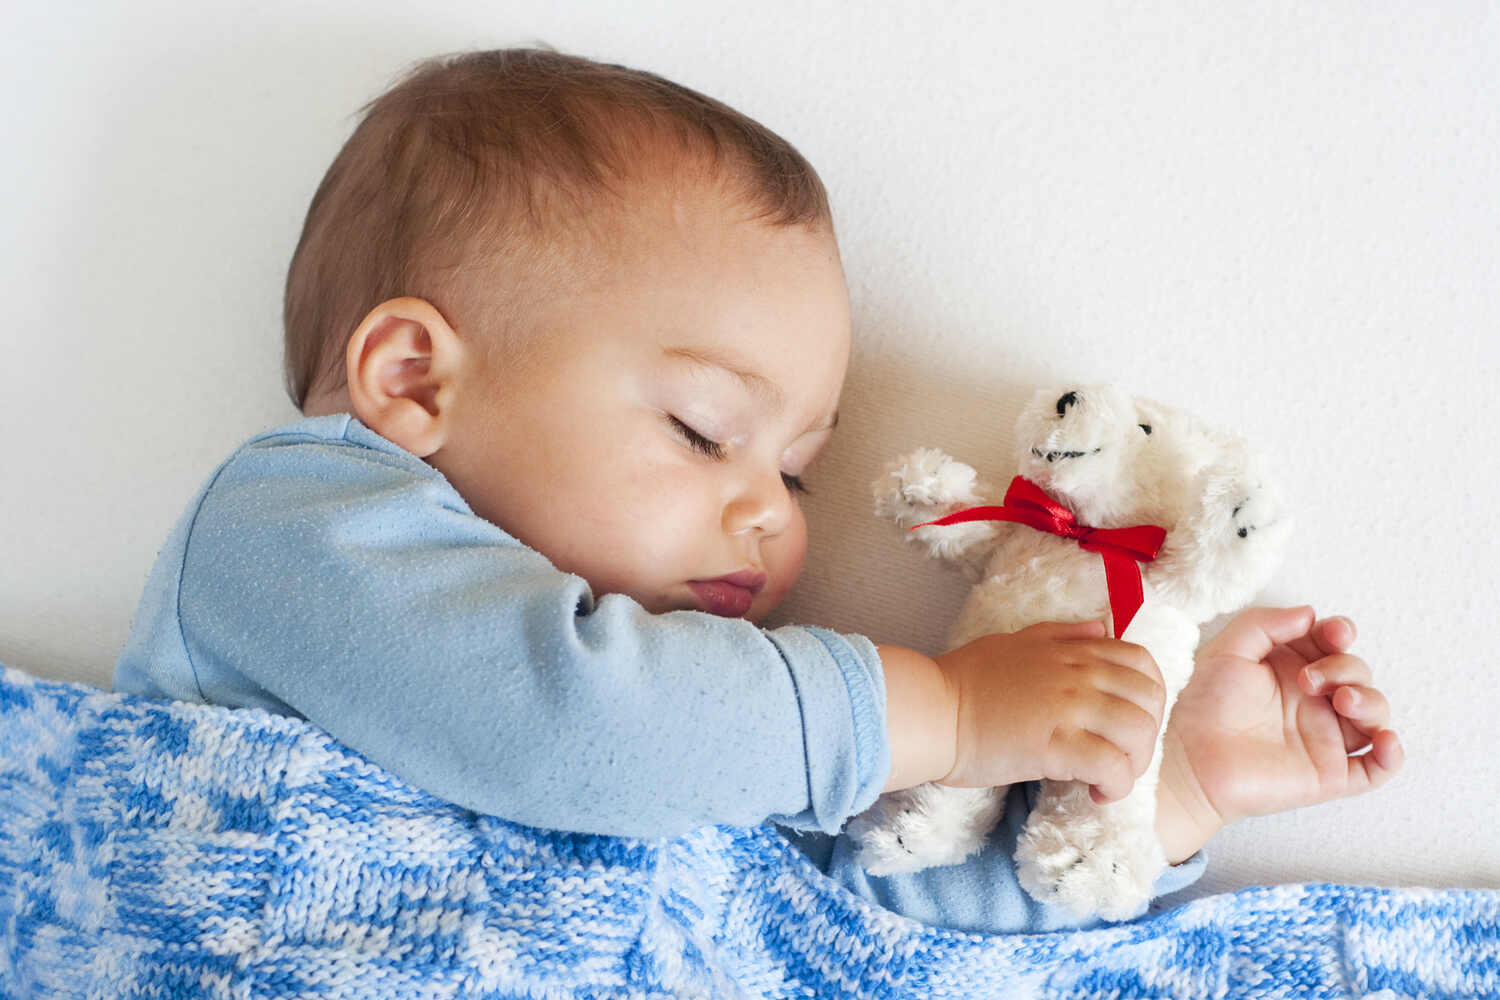 A toddler sleeping with his soft toy